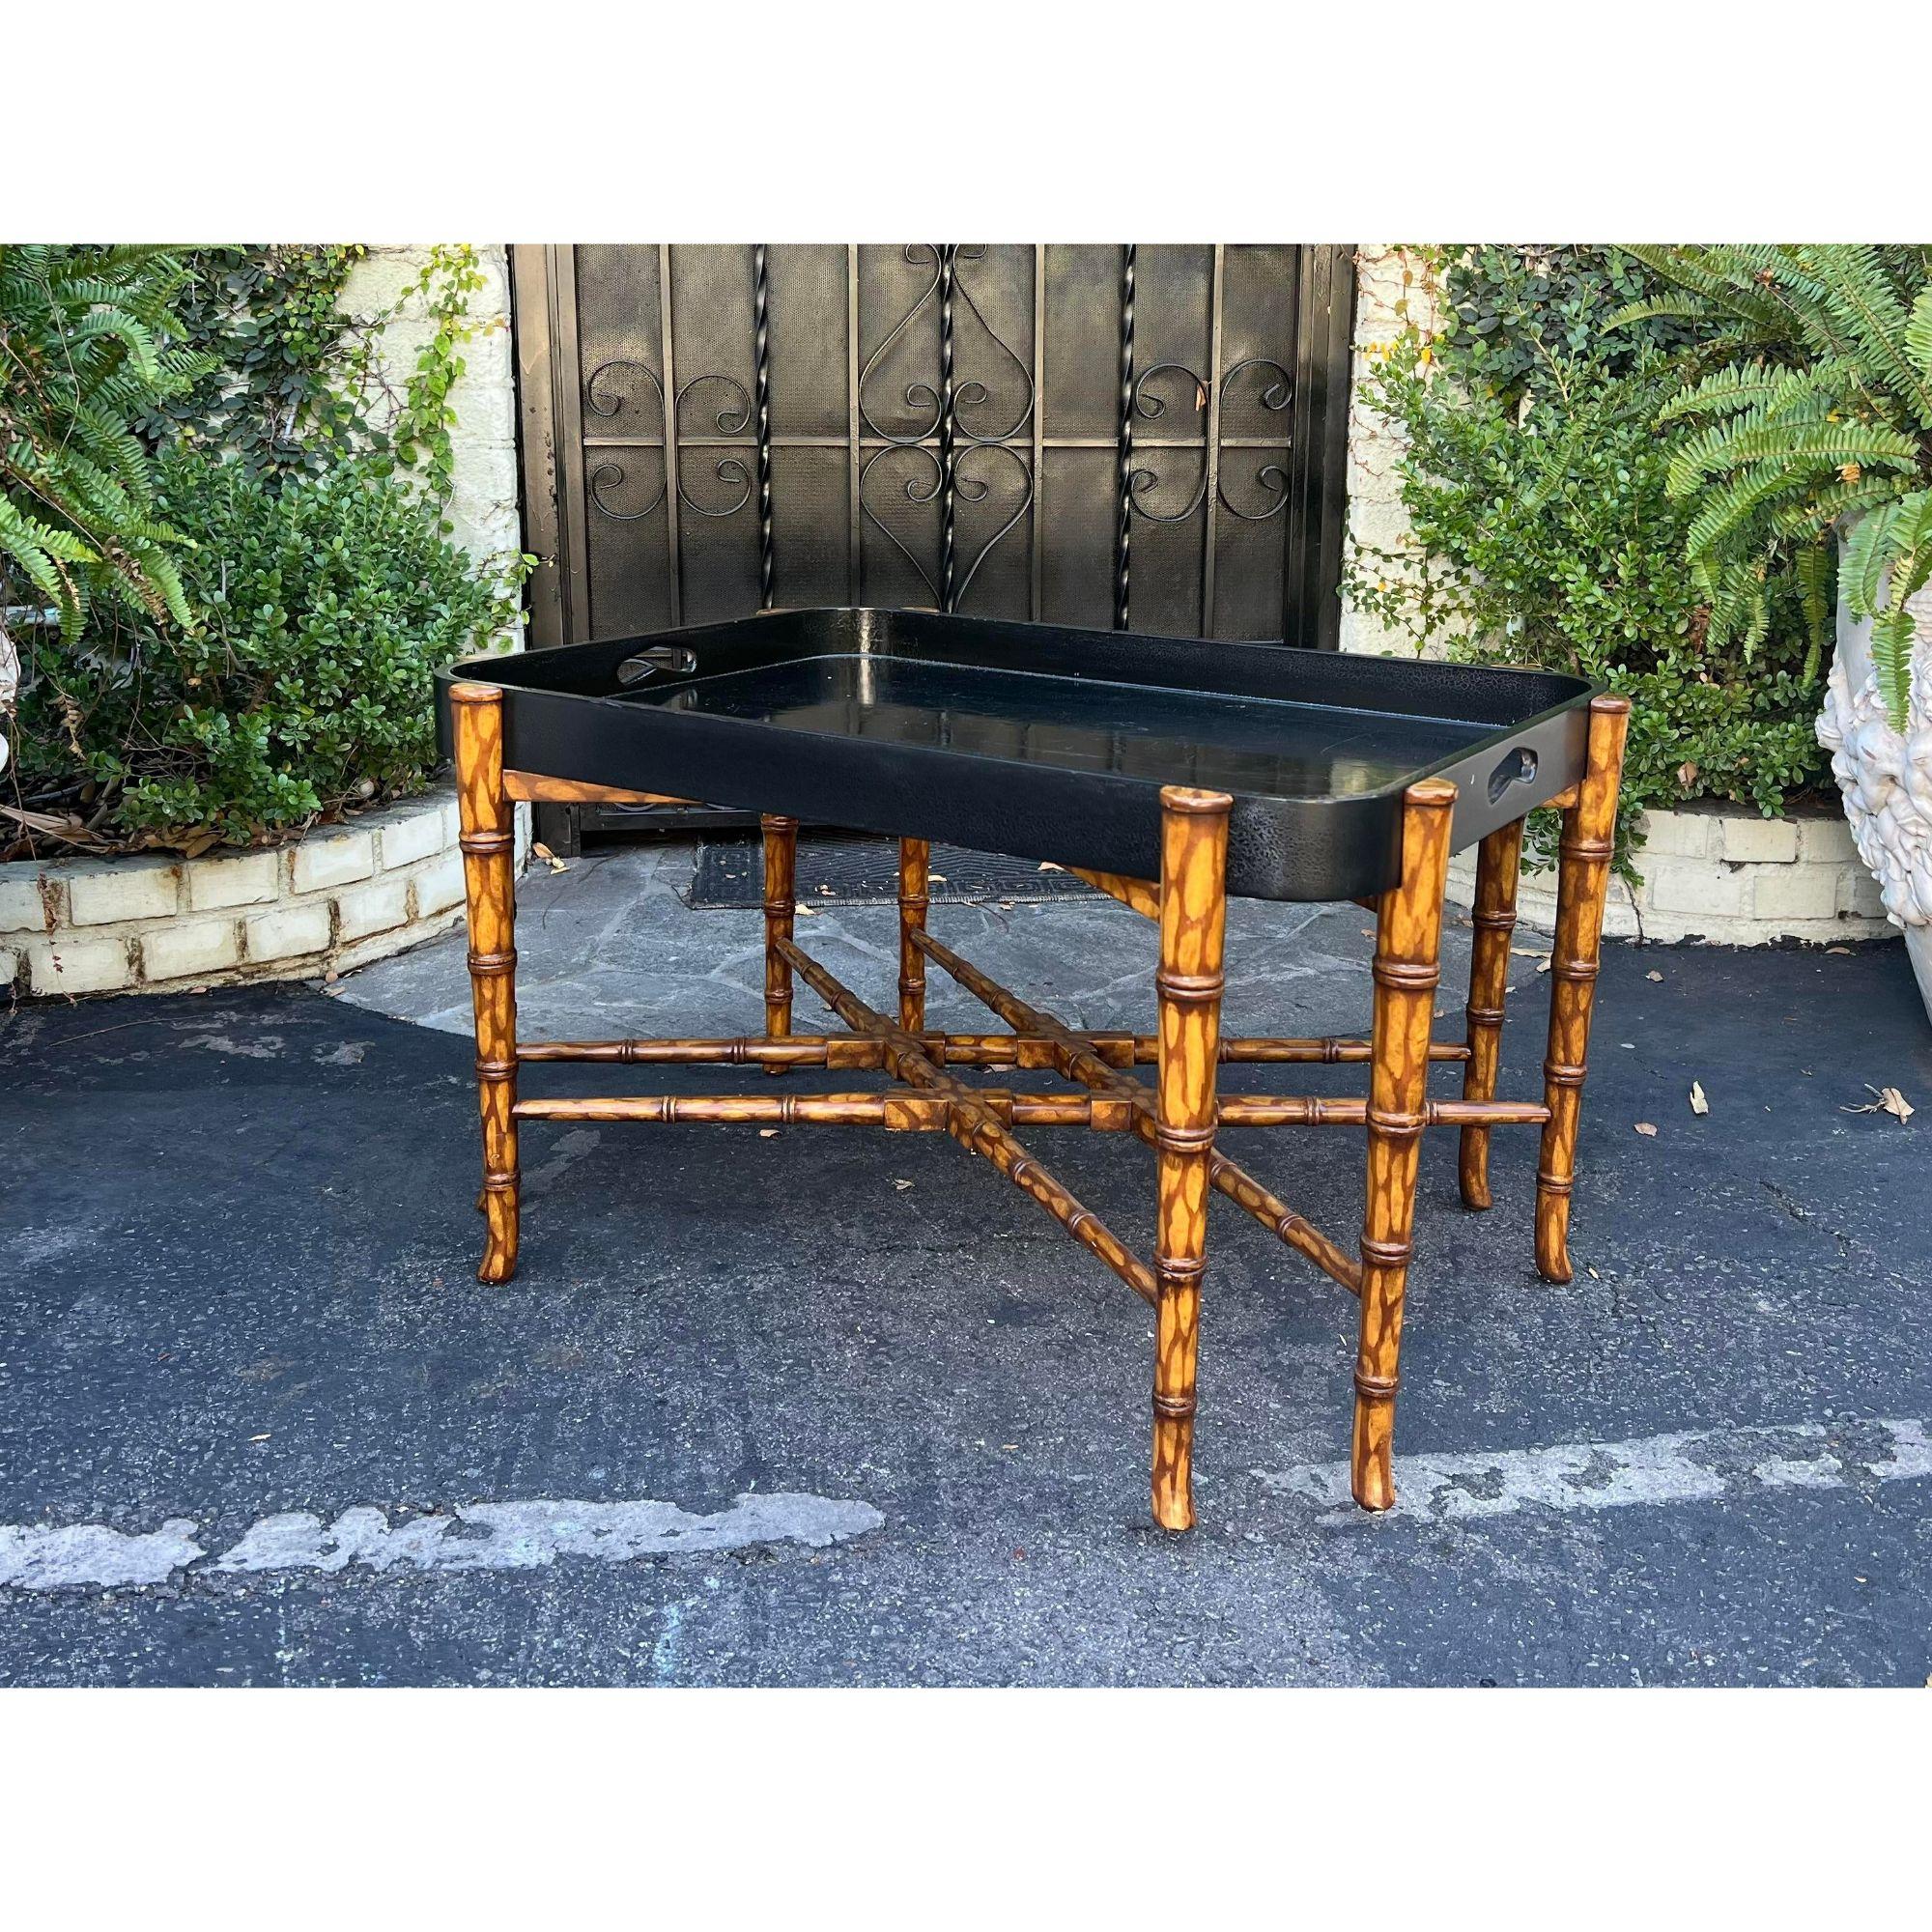 Dessin Fournir Regency Style Faux Bamboo & Black Lacquer Coffee Table. It features a removable black crackle lacquer tray that sits on a faux bamboo stand.